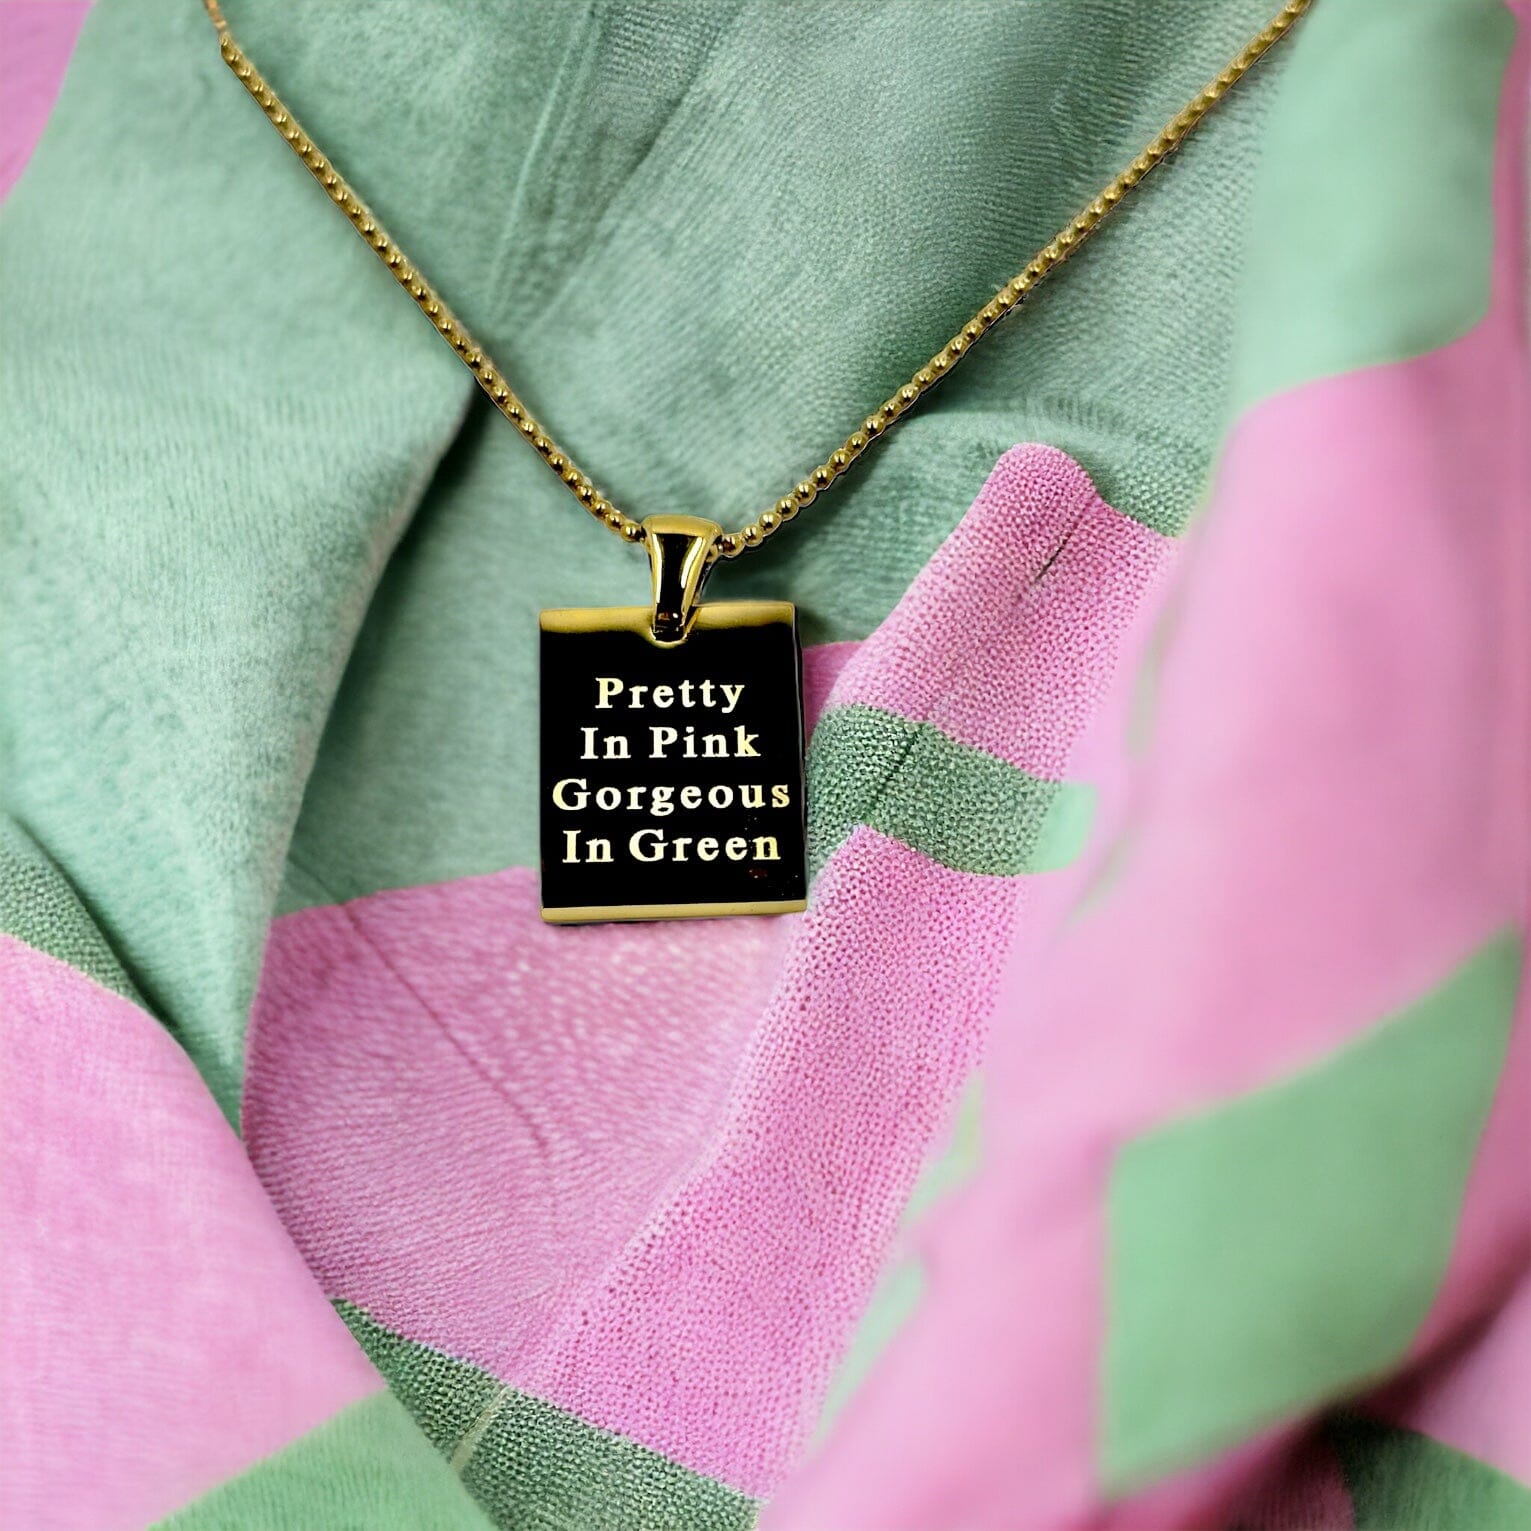 AKA Pretty In Pink Gorgeous in Green Gold Necklace Necklaces Trendzio 